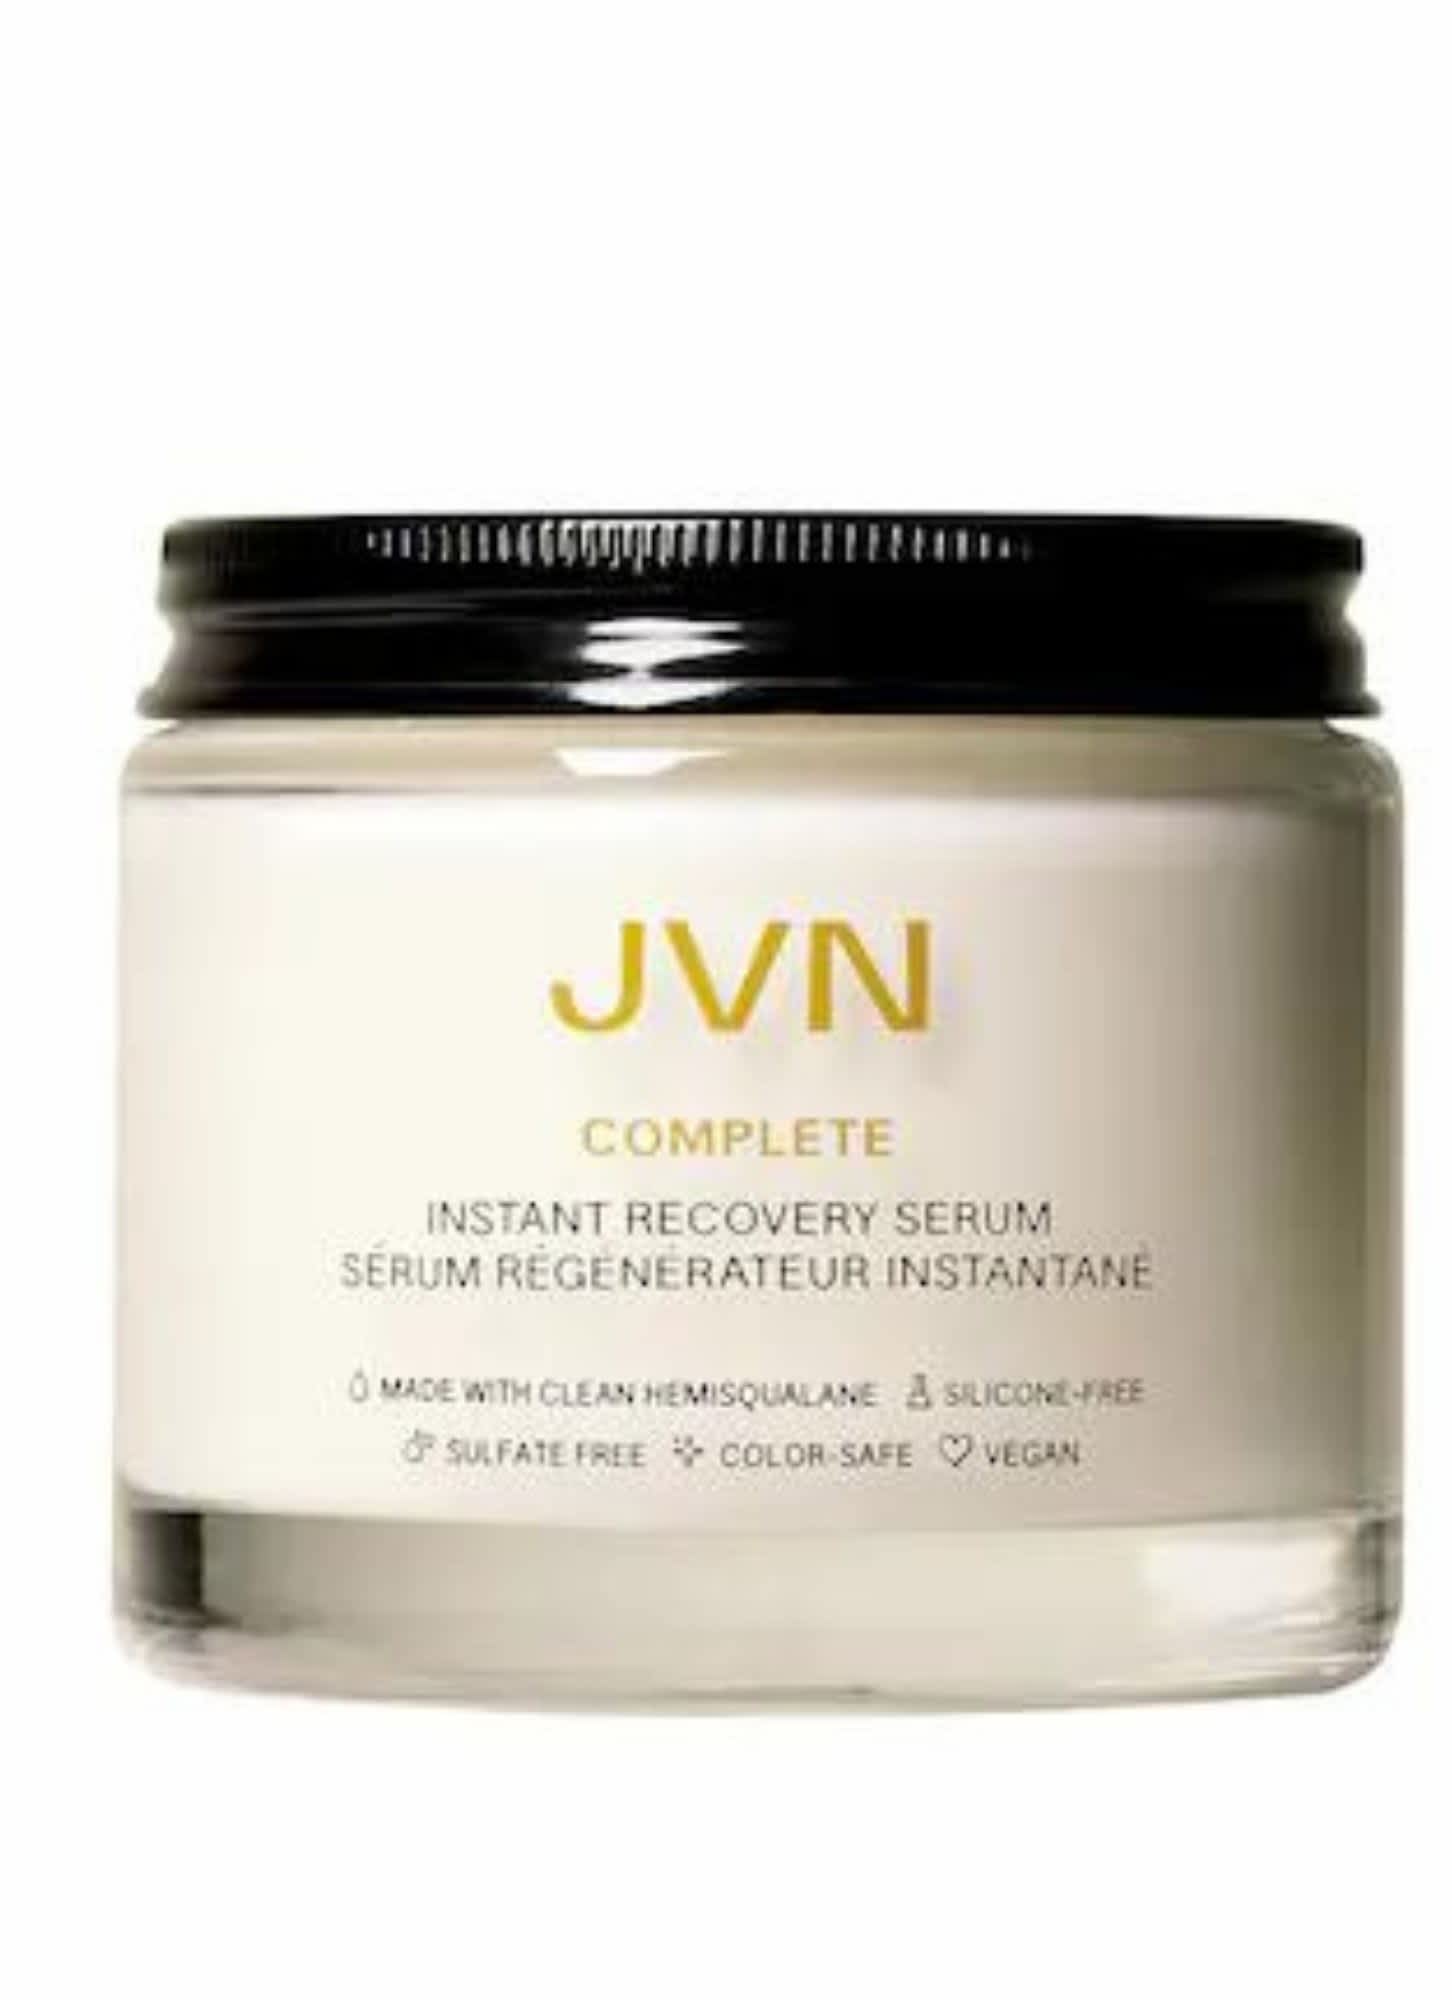 JVN, Complete Instant Recovery Serum